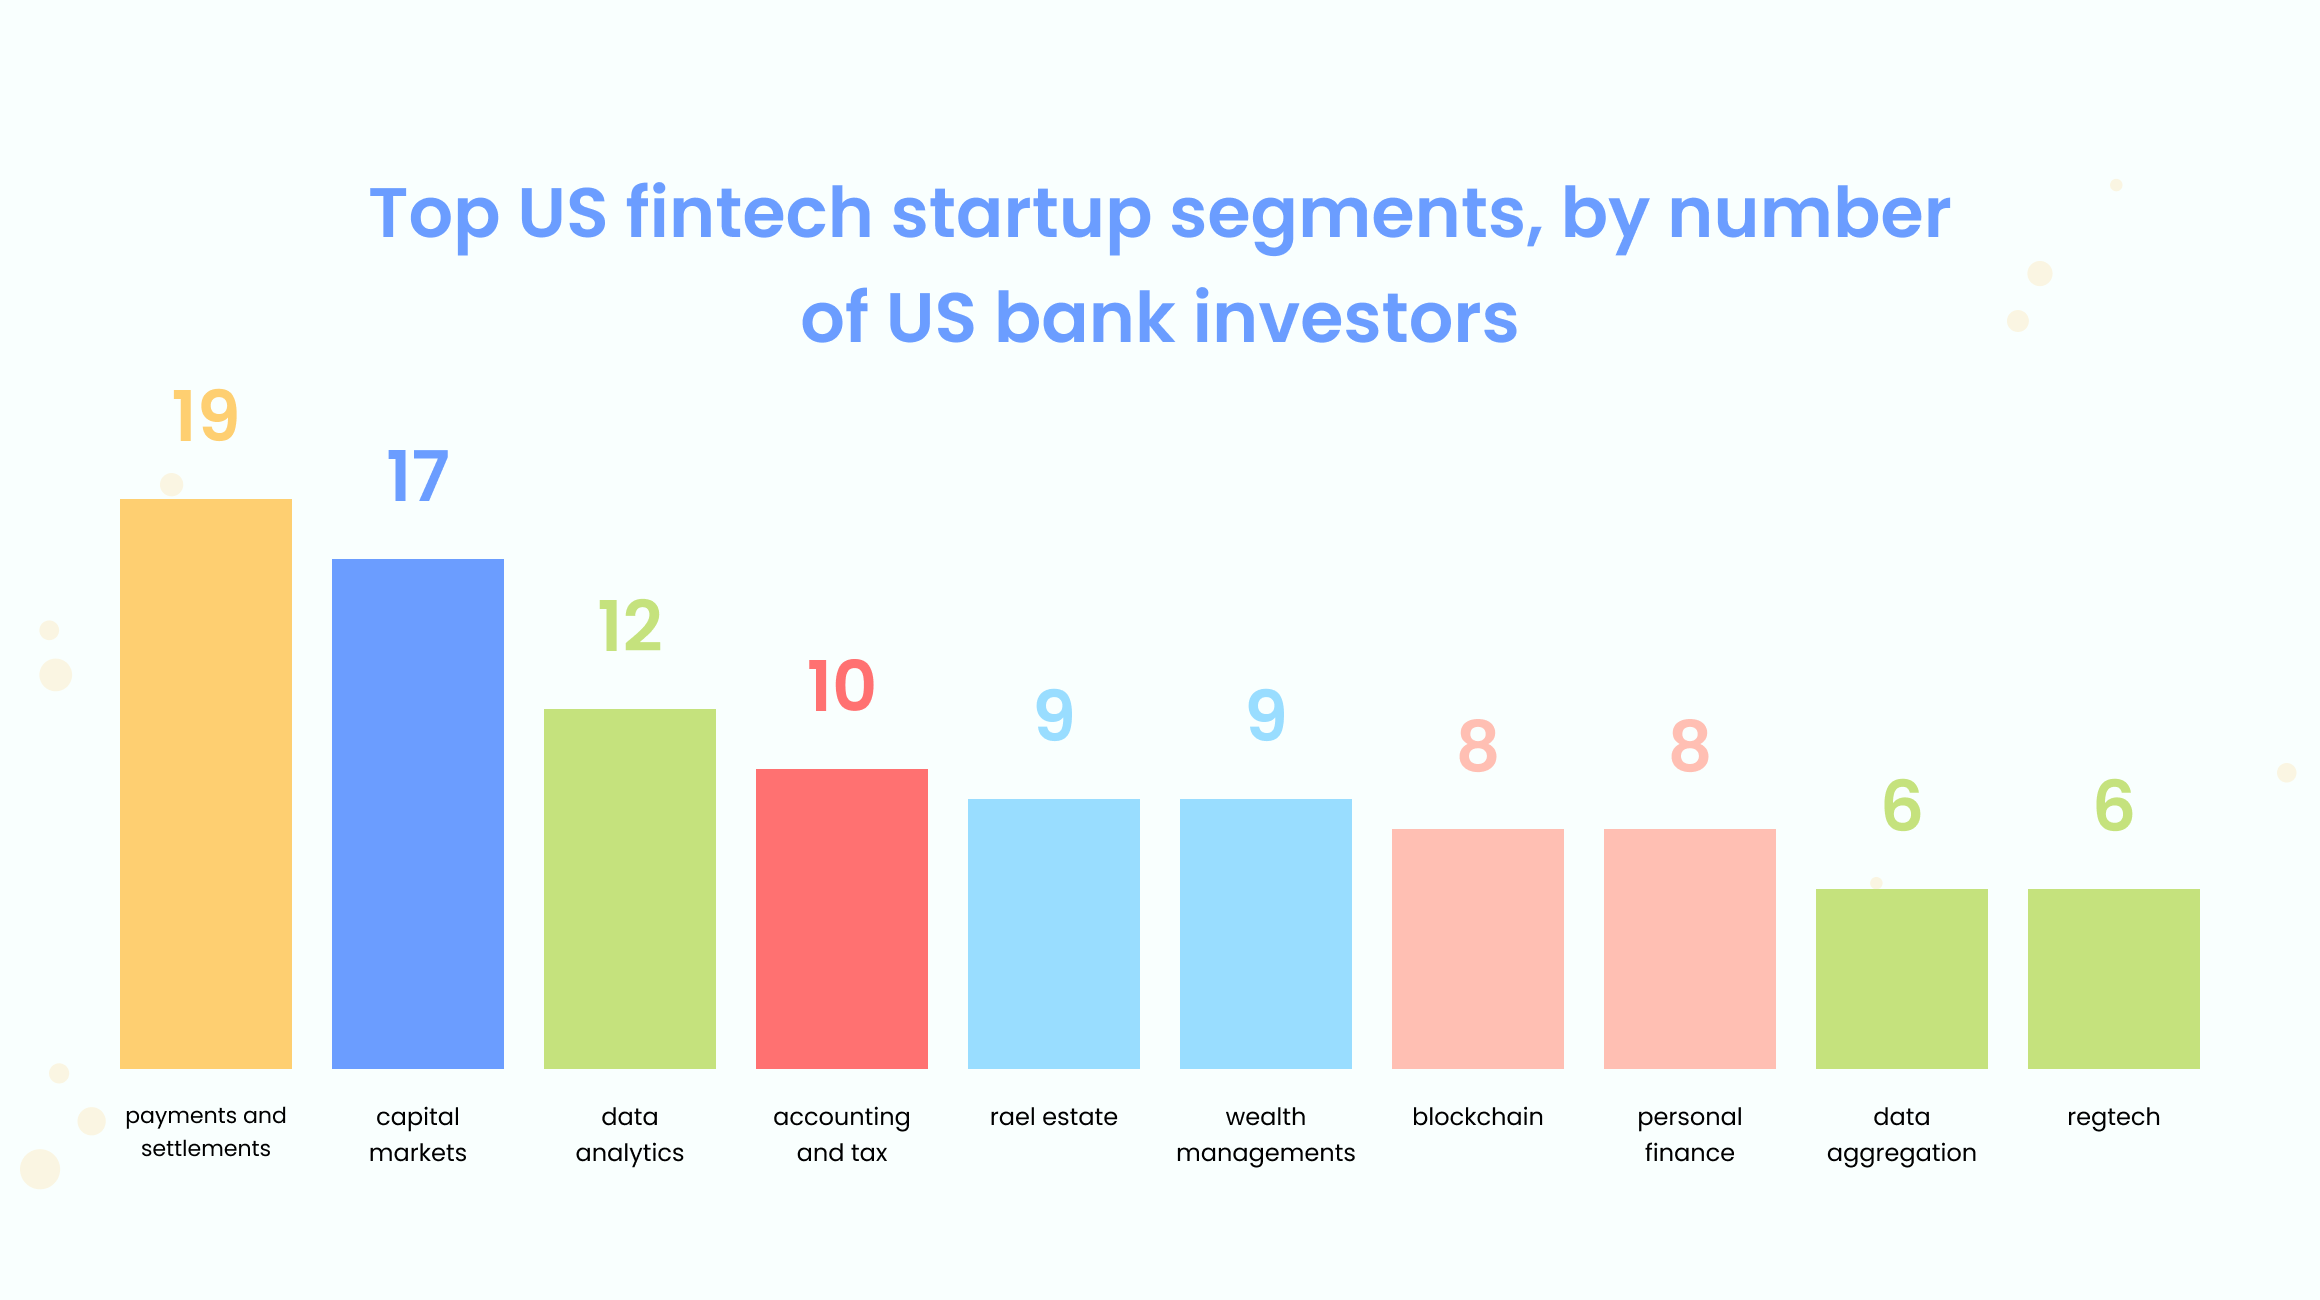 Top US fintech startup segments by number of US investors 